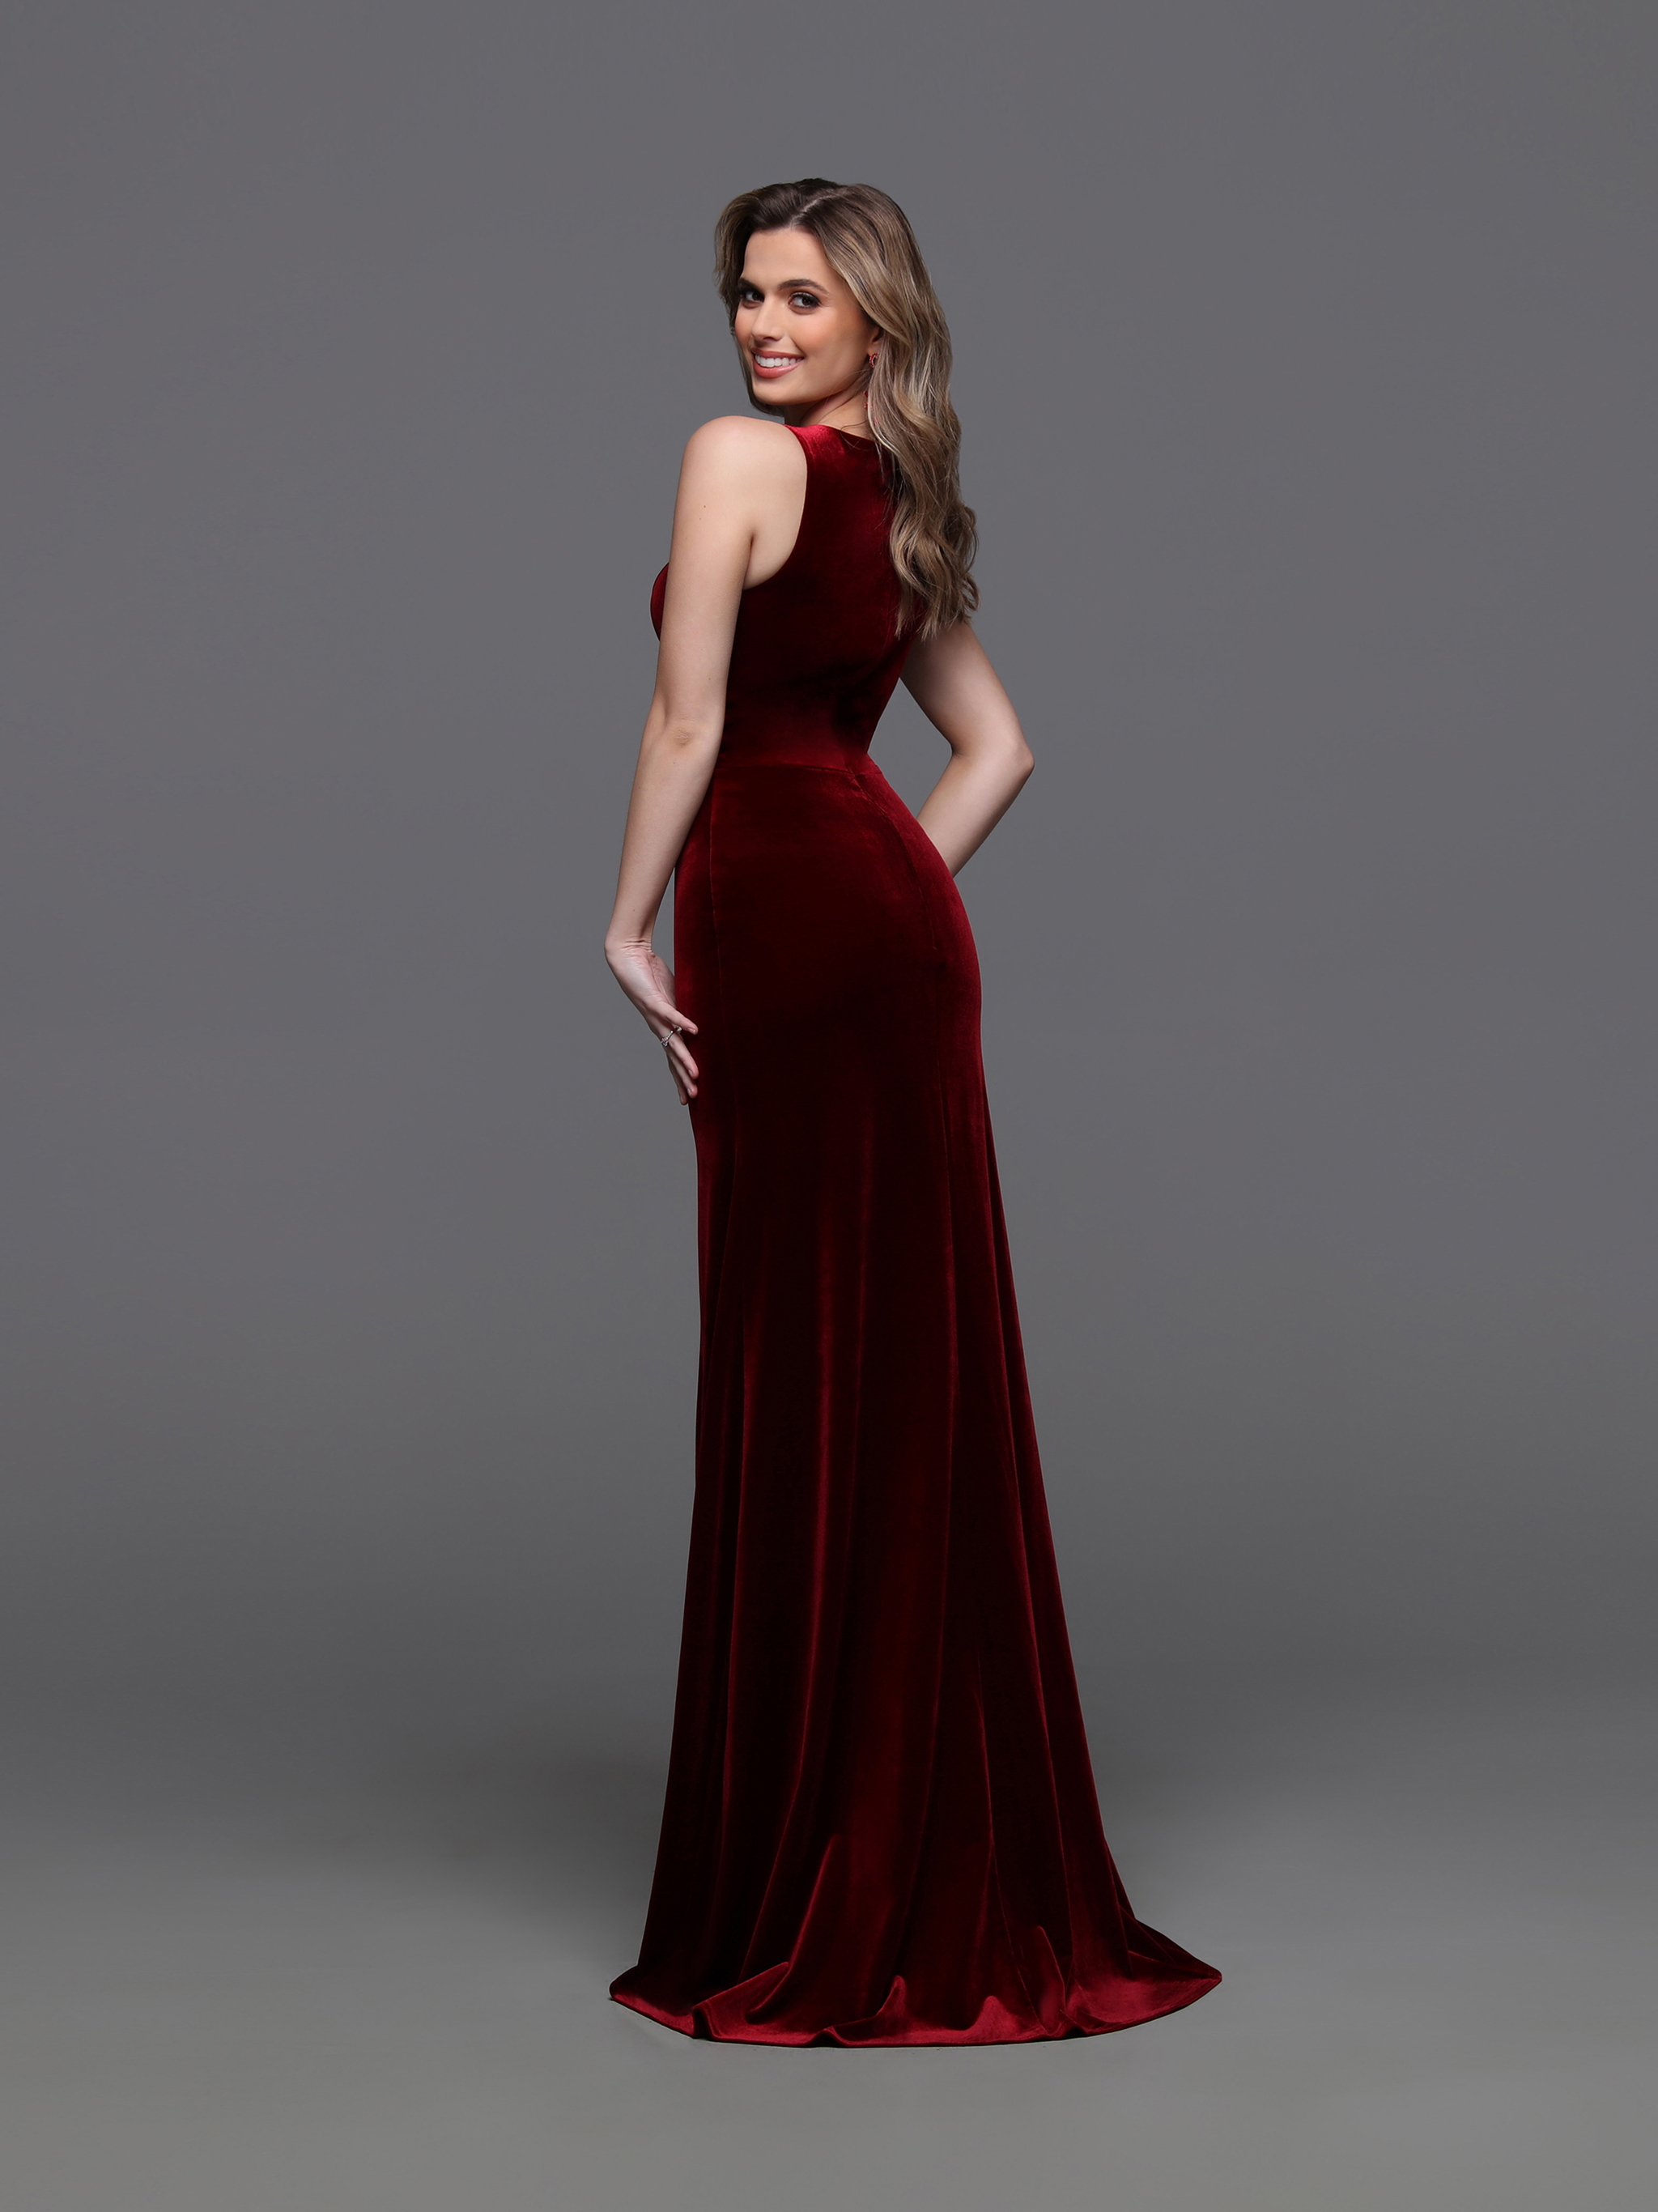 Image showing back view of style #60679